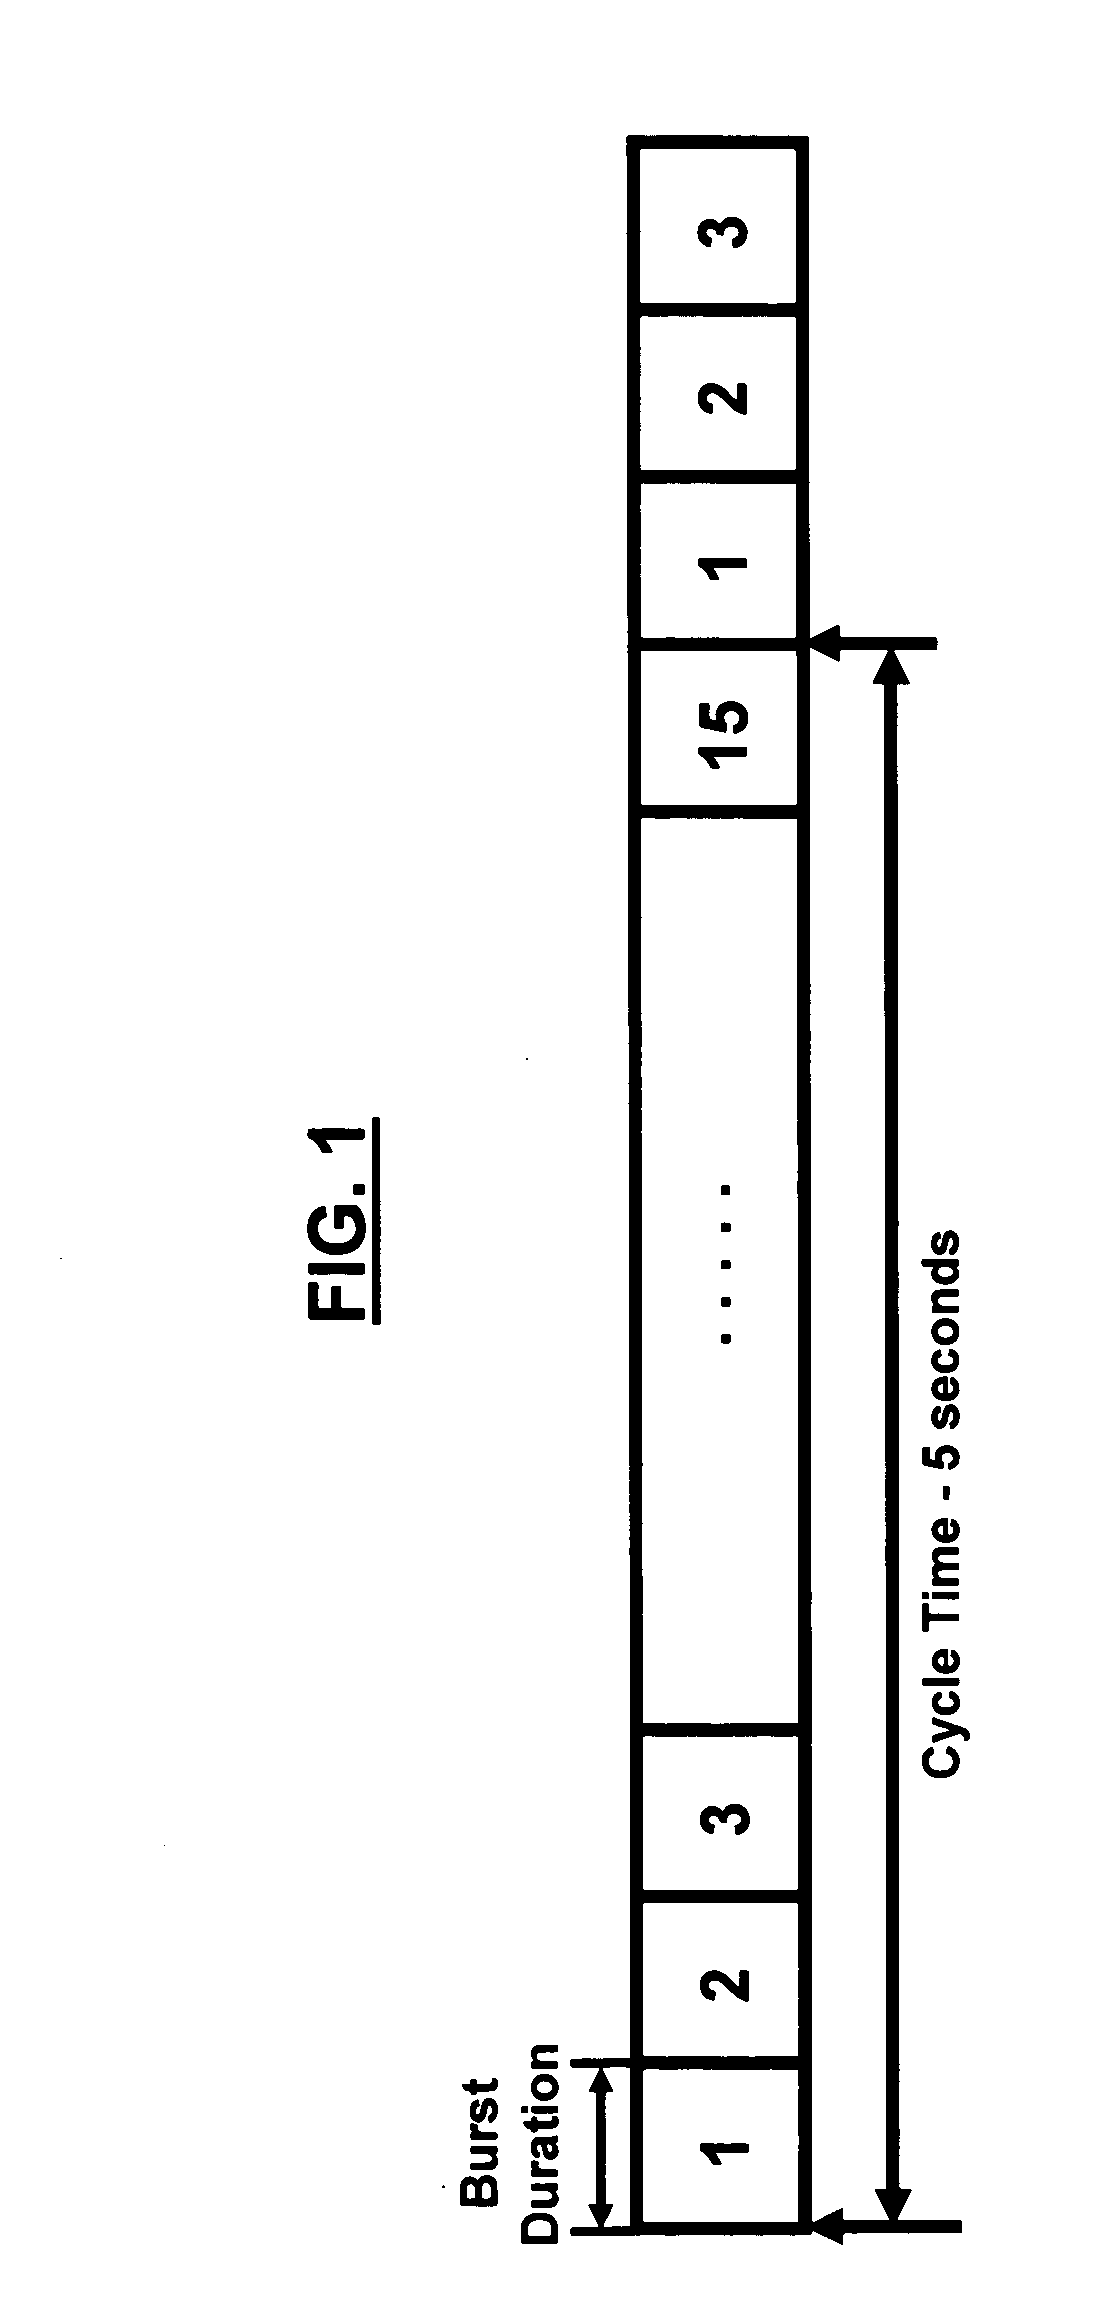 System and method for statistical multiplexing of video channels for DVB-H mobile TV applications